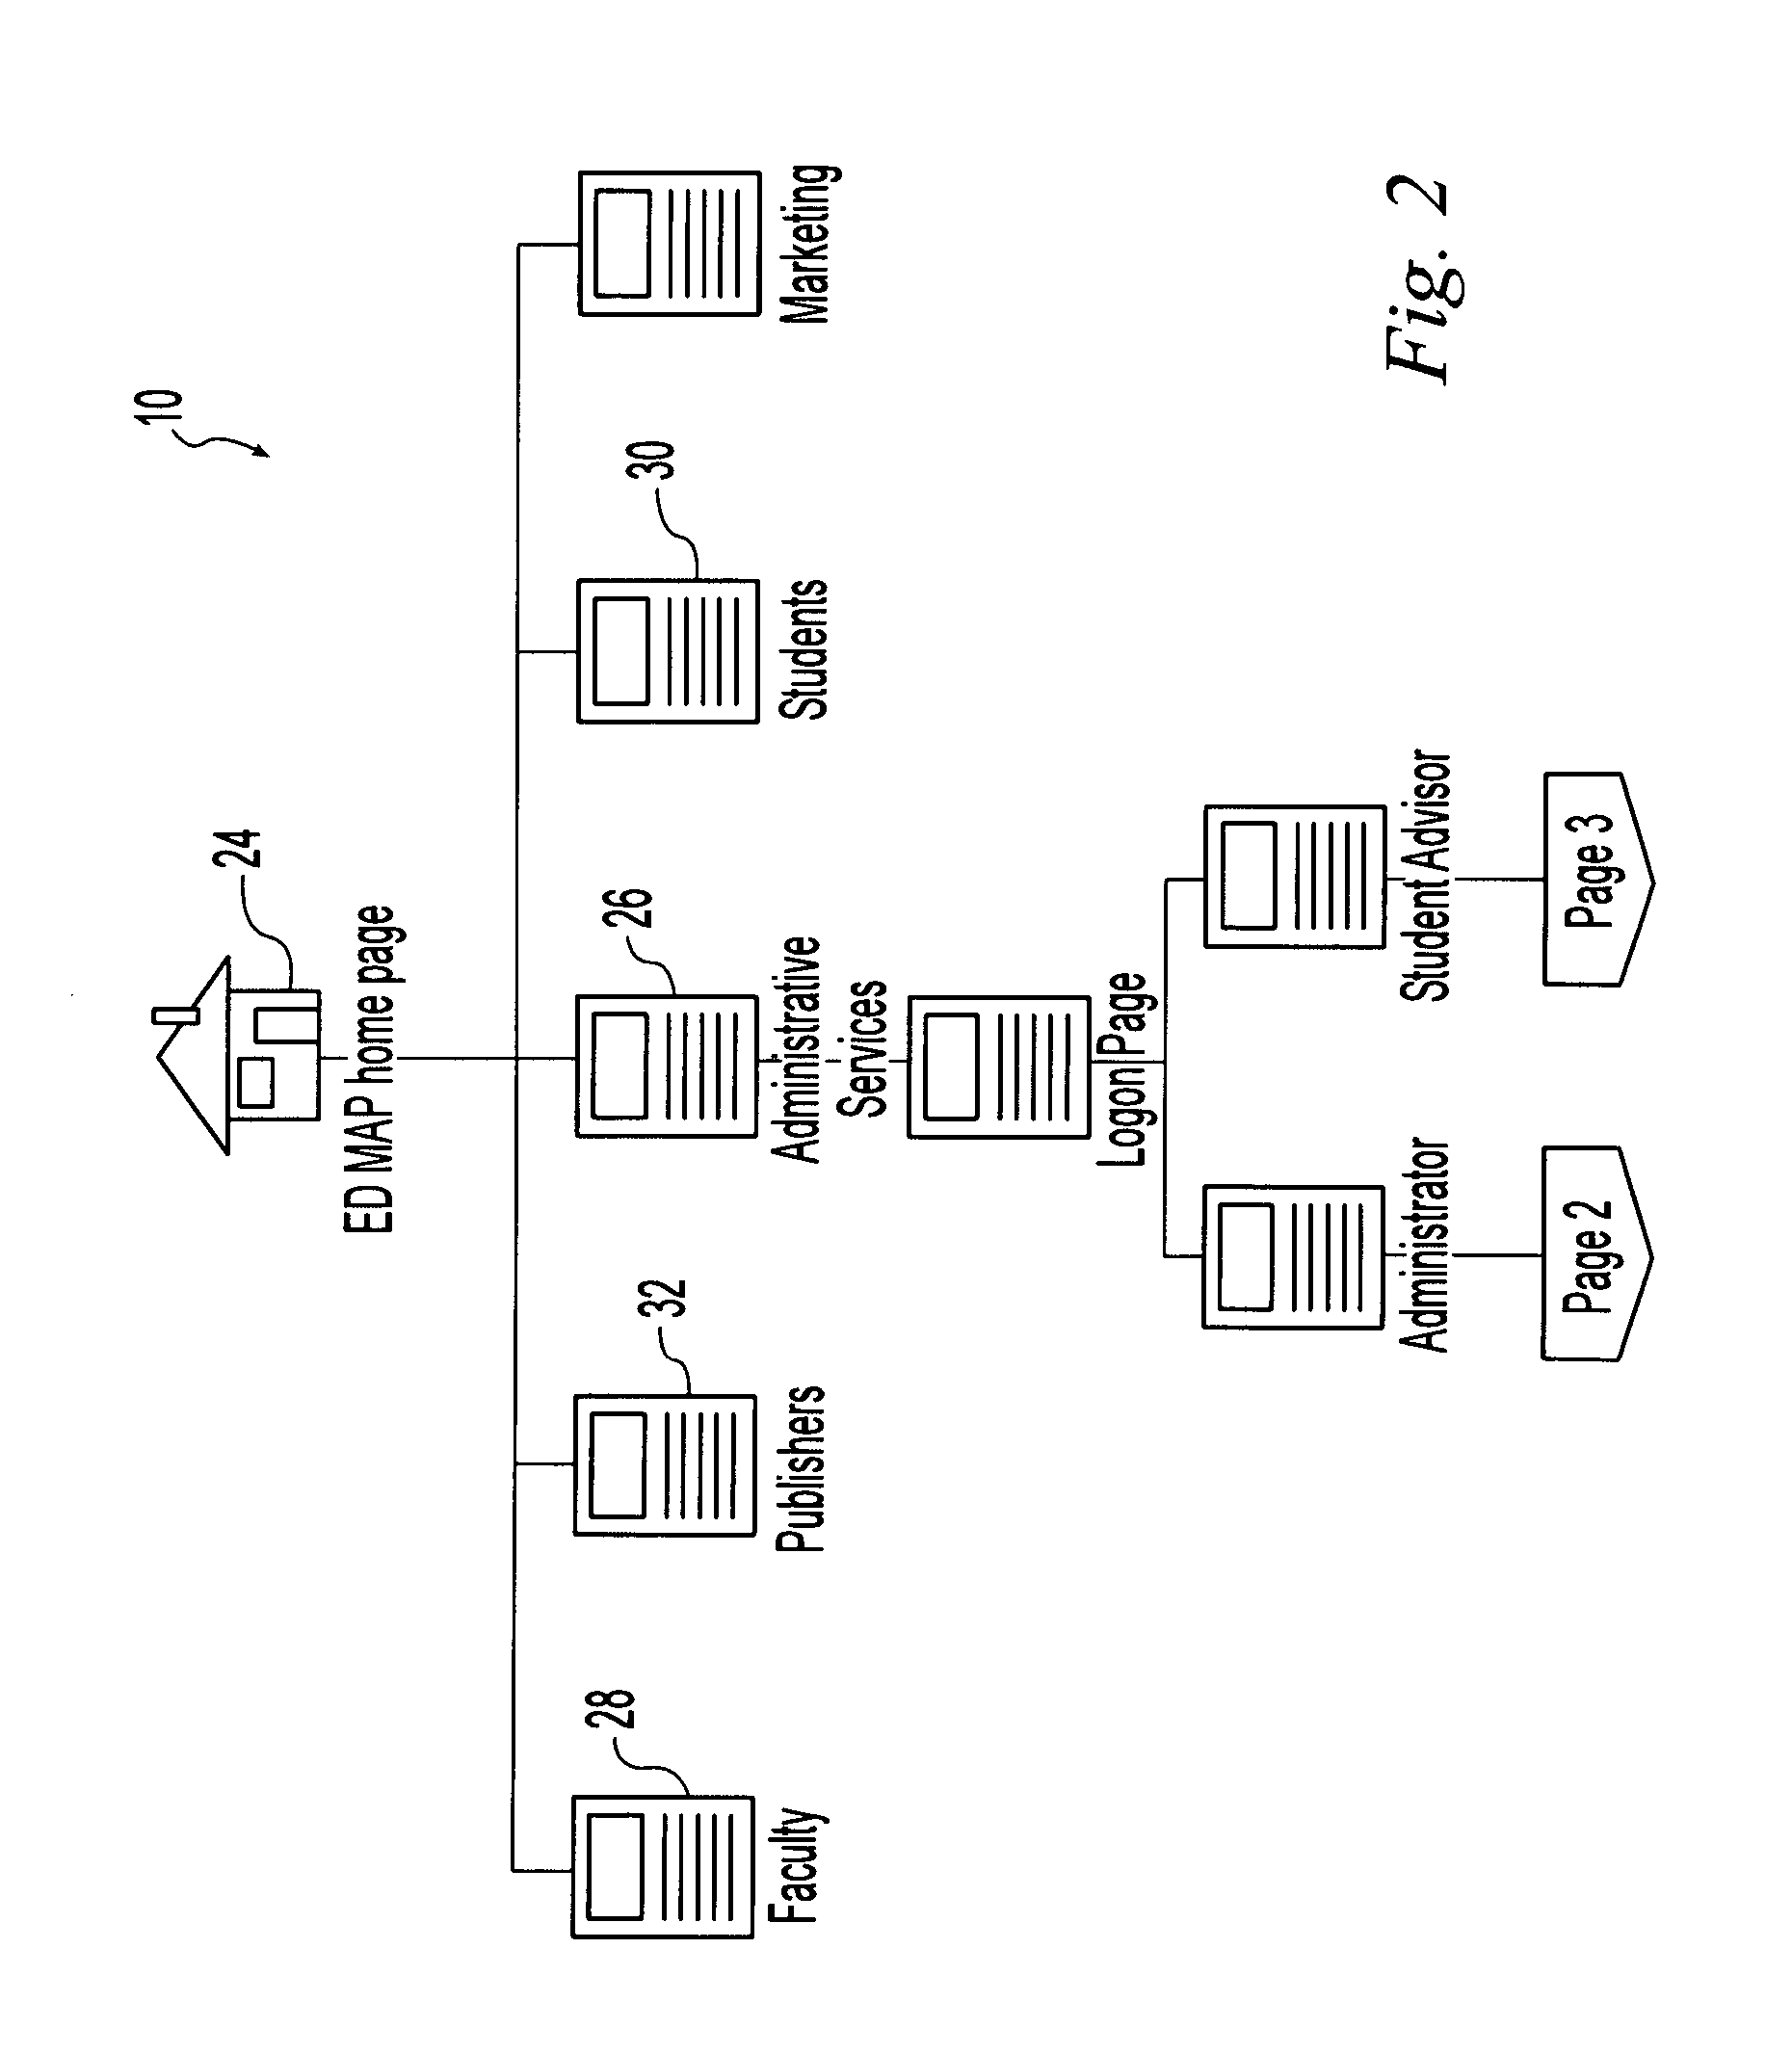 System and method for selecting and managing course materials with integrated distribution and sales of materials